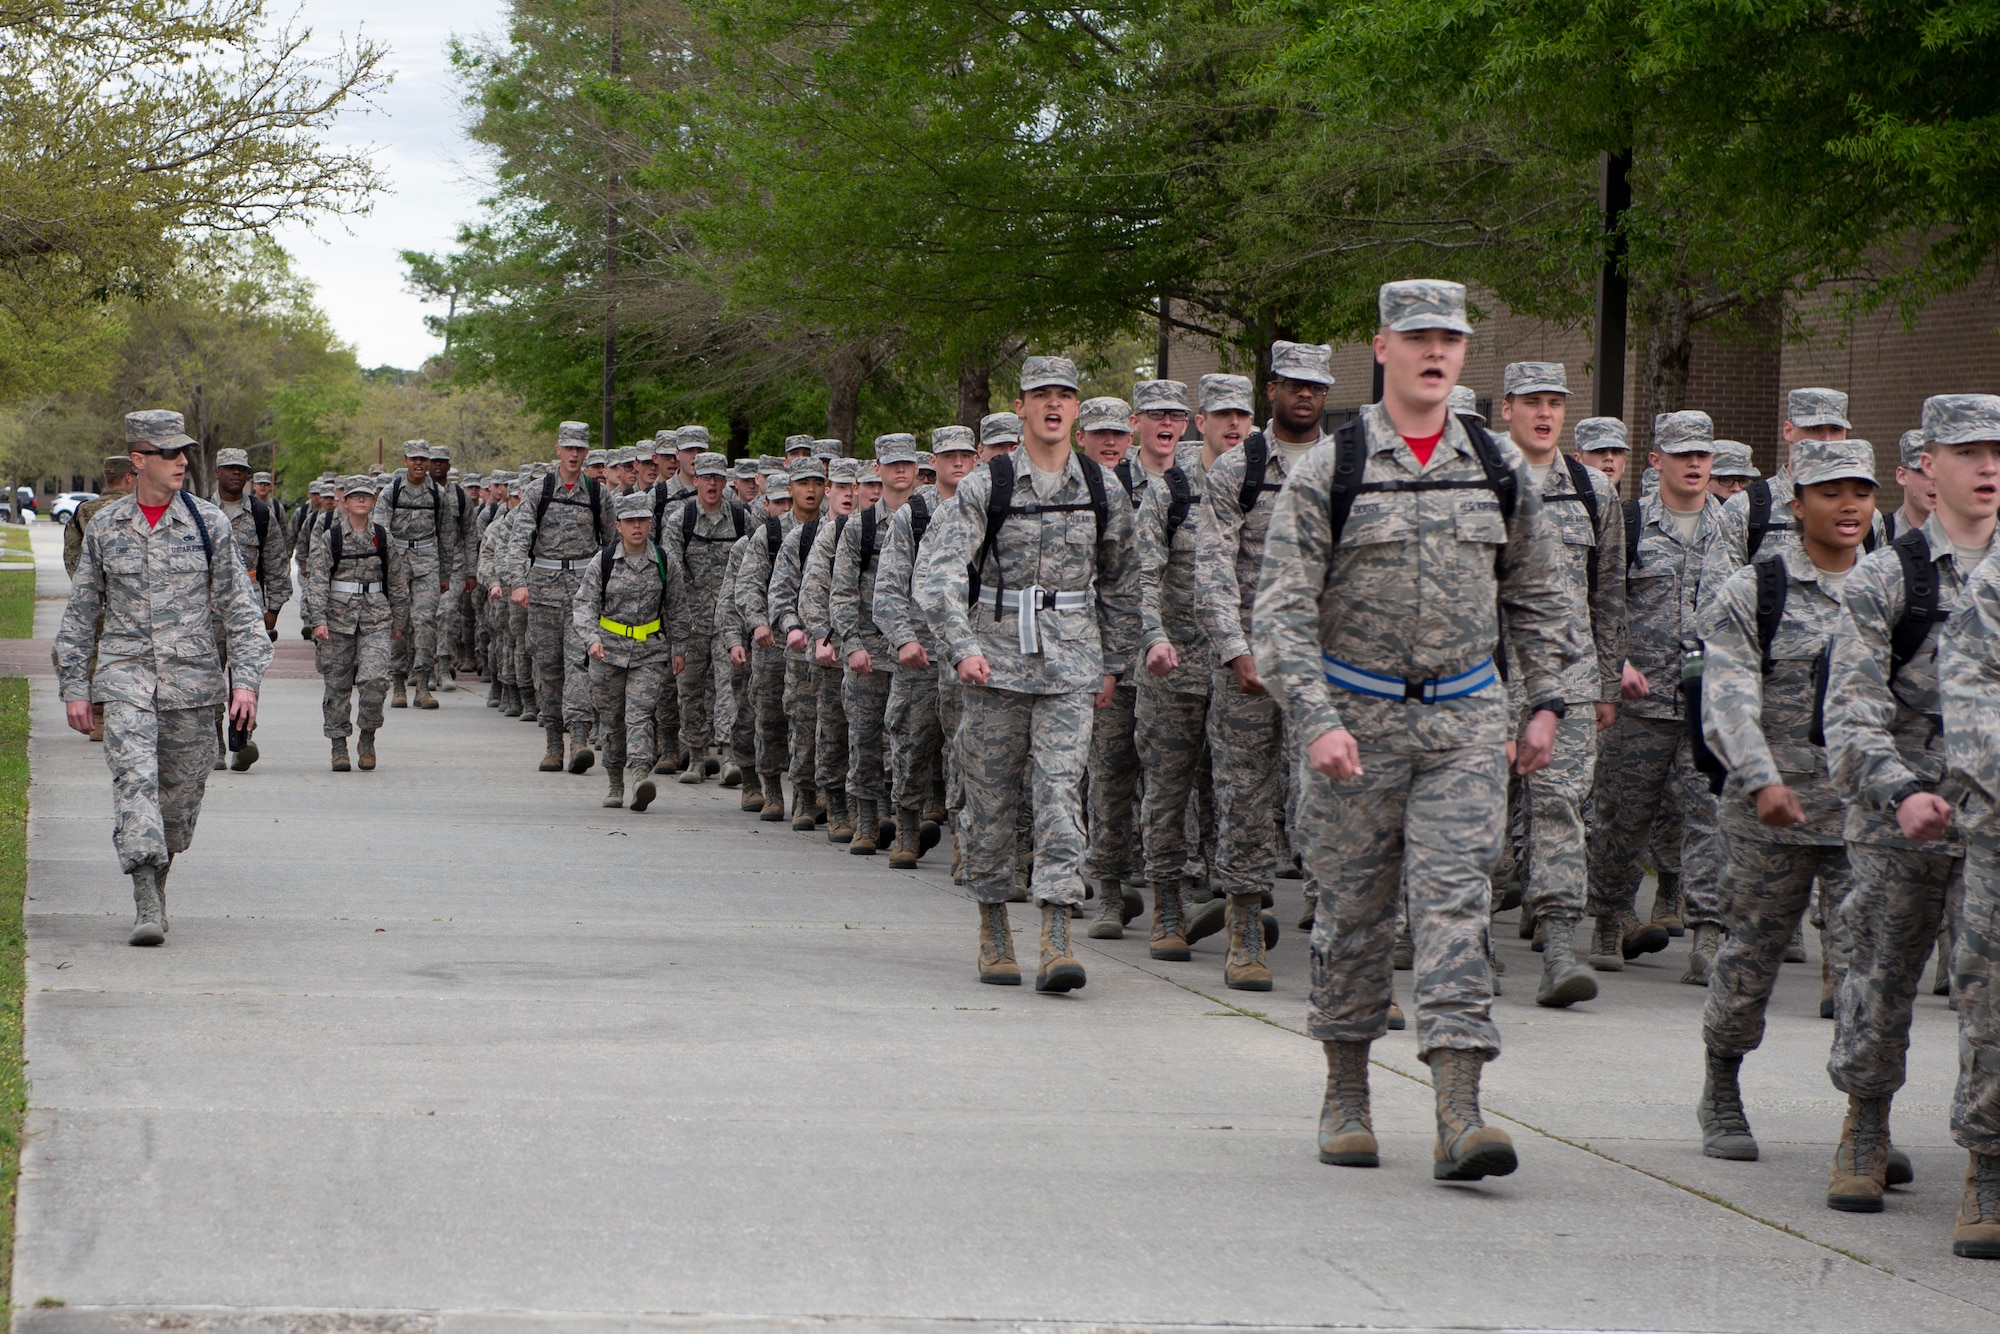 U.S. Air Force Tech. Sgt. Joshua Free, 336th Training Squadron military training leader, marches the 336th TRS students to their dorms at Keesler Air Force Base, Mississippi, March 15, 2019. While marching, Free ensures the Airmen maintain their military bearing in order to continue the disciplinary foundation provided in Basic Military Training. (U.S. Air Force photo by Airman 1st Class Kimberly L. Mueller)